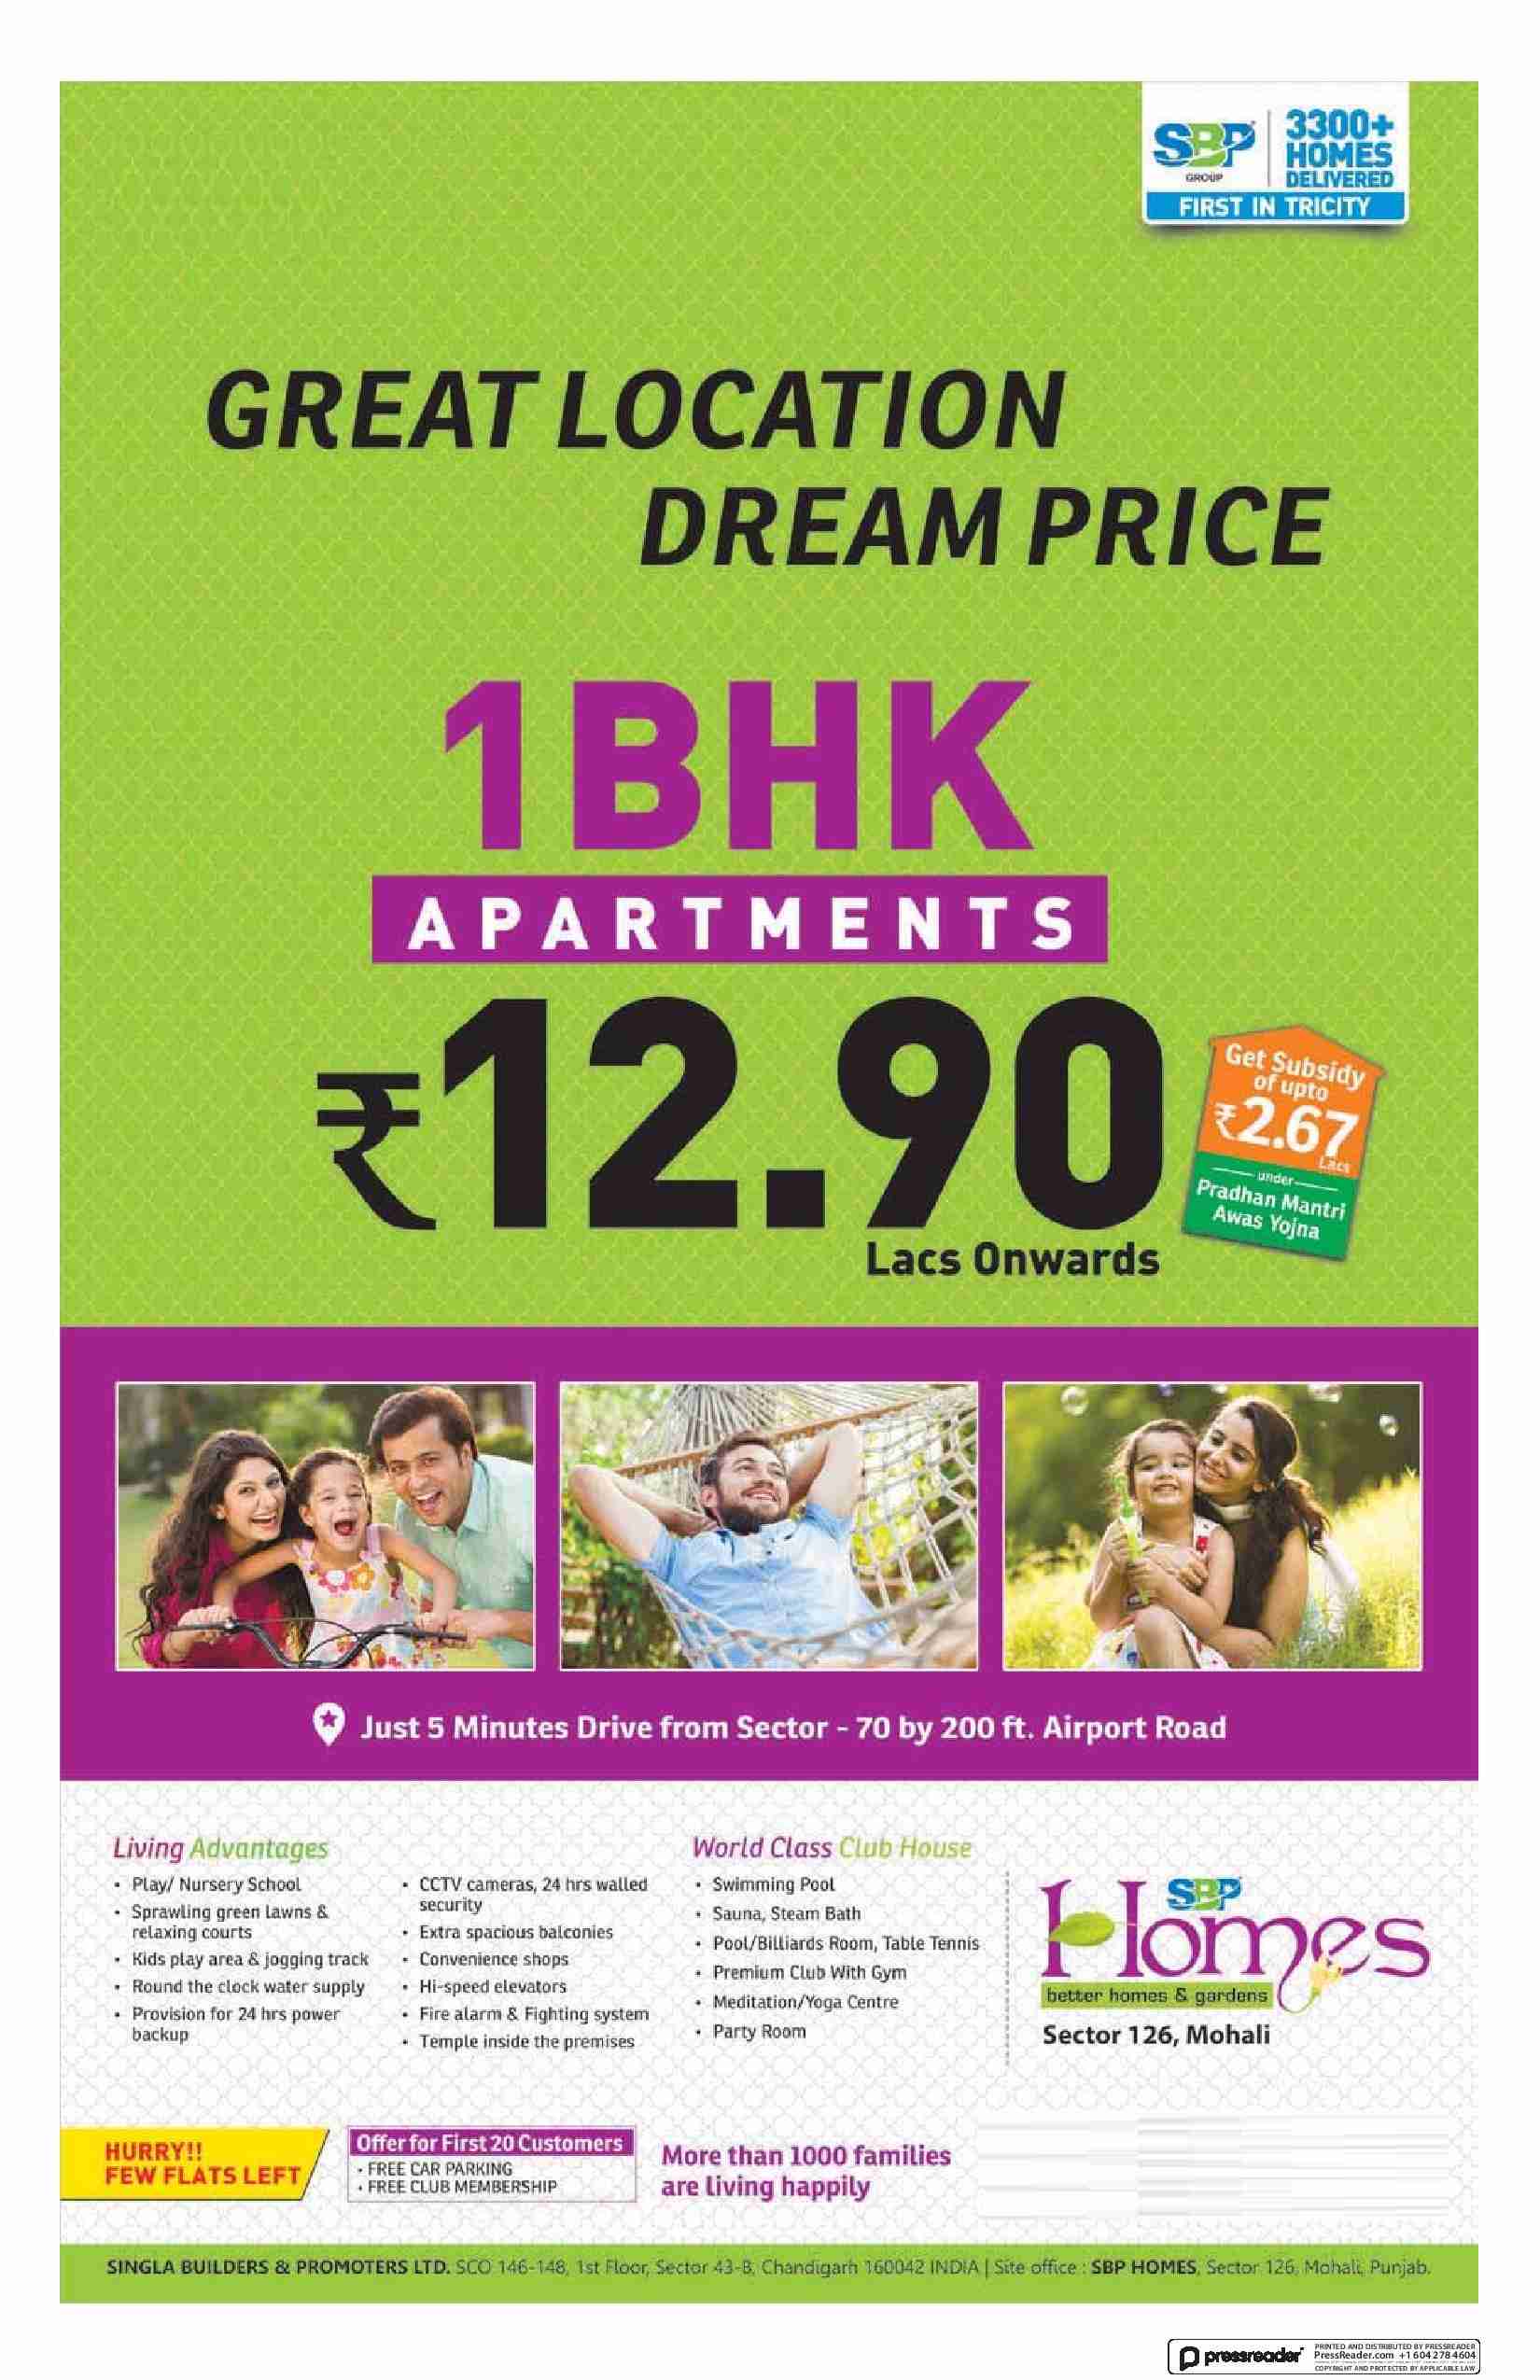 SBP Homes presents 1 BHK apartments with great location and dream price in Mohali Update